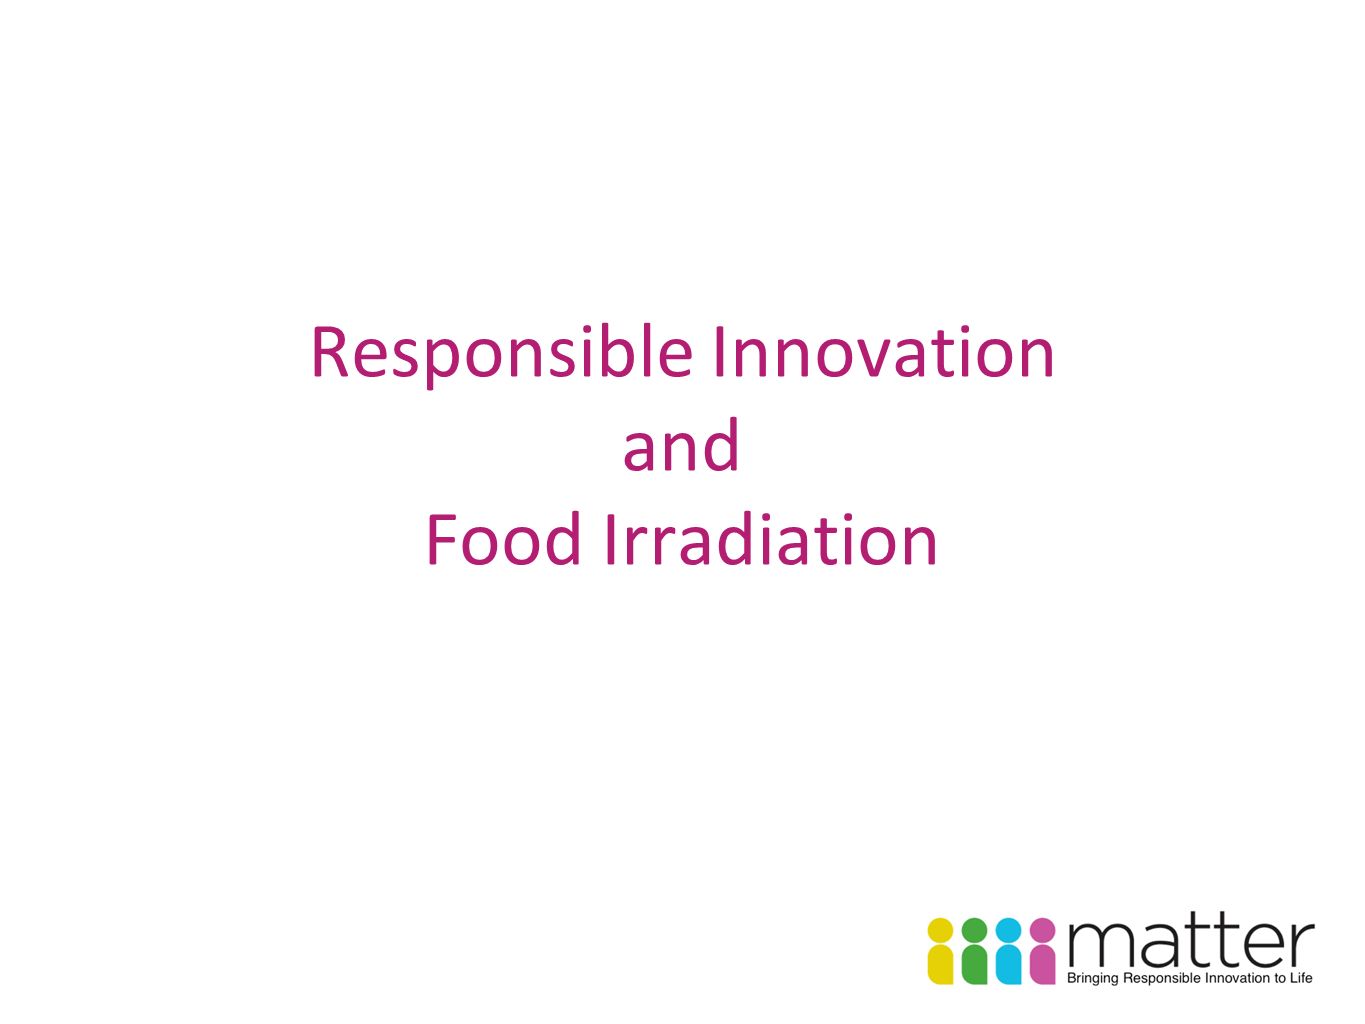 Responsible Innovation and Food Irradiation